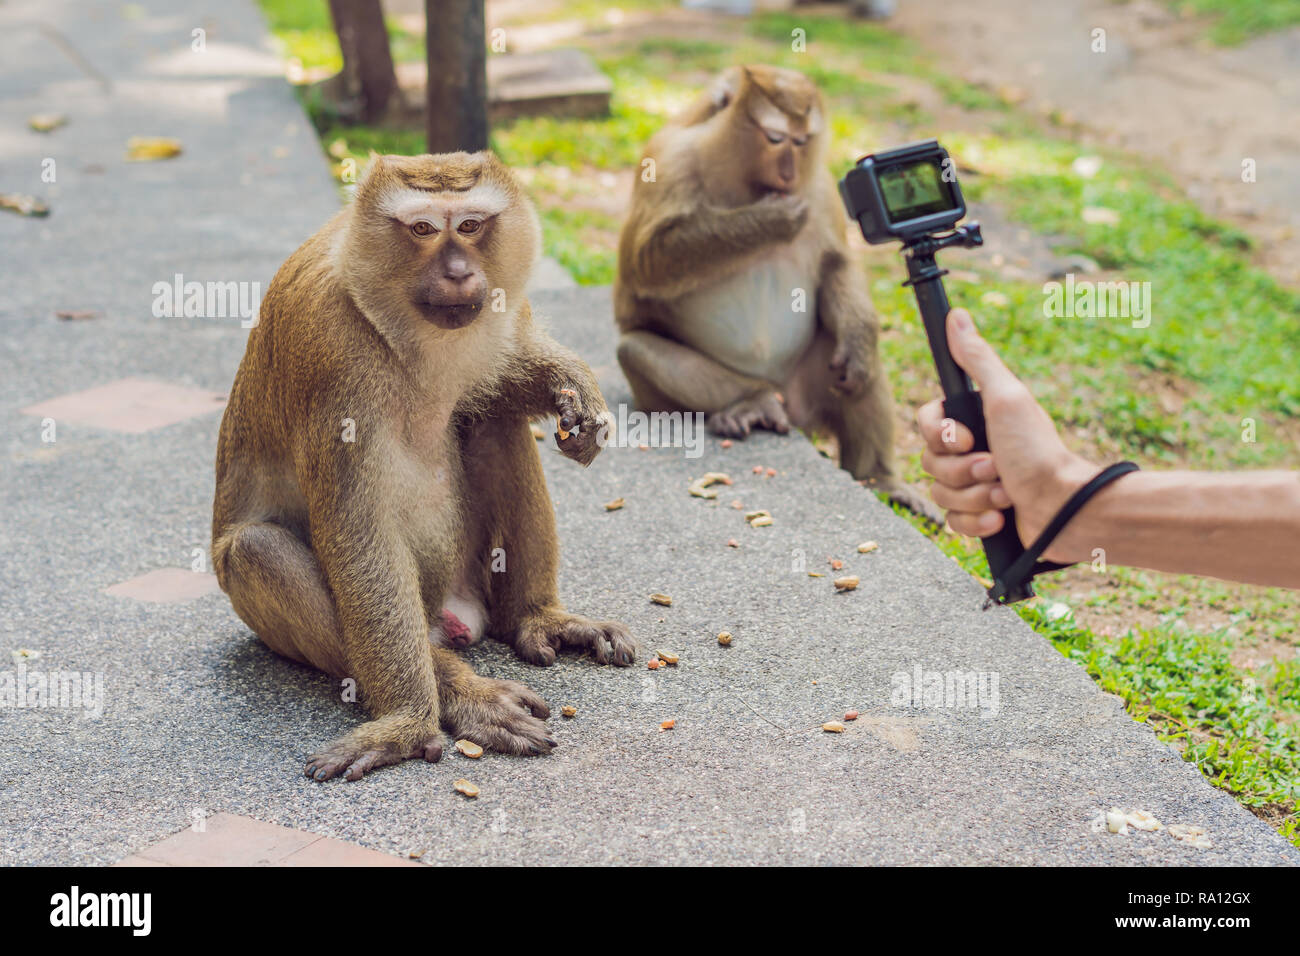 A man takes a picture of a monkey on an action camera Stock Photo